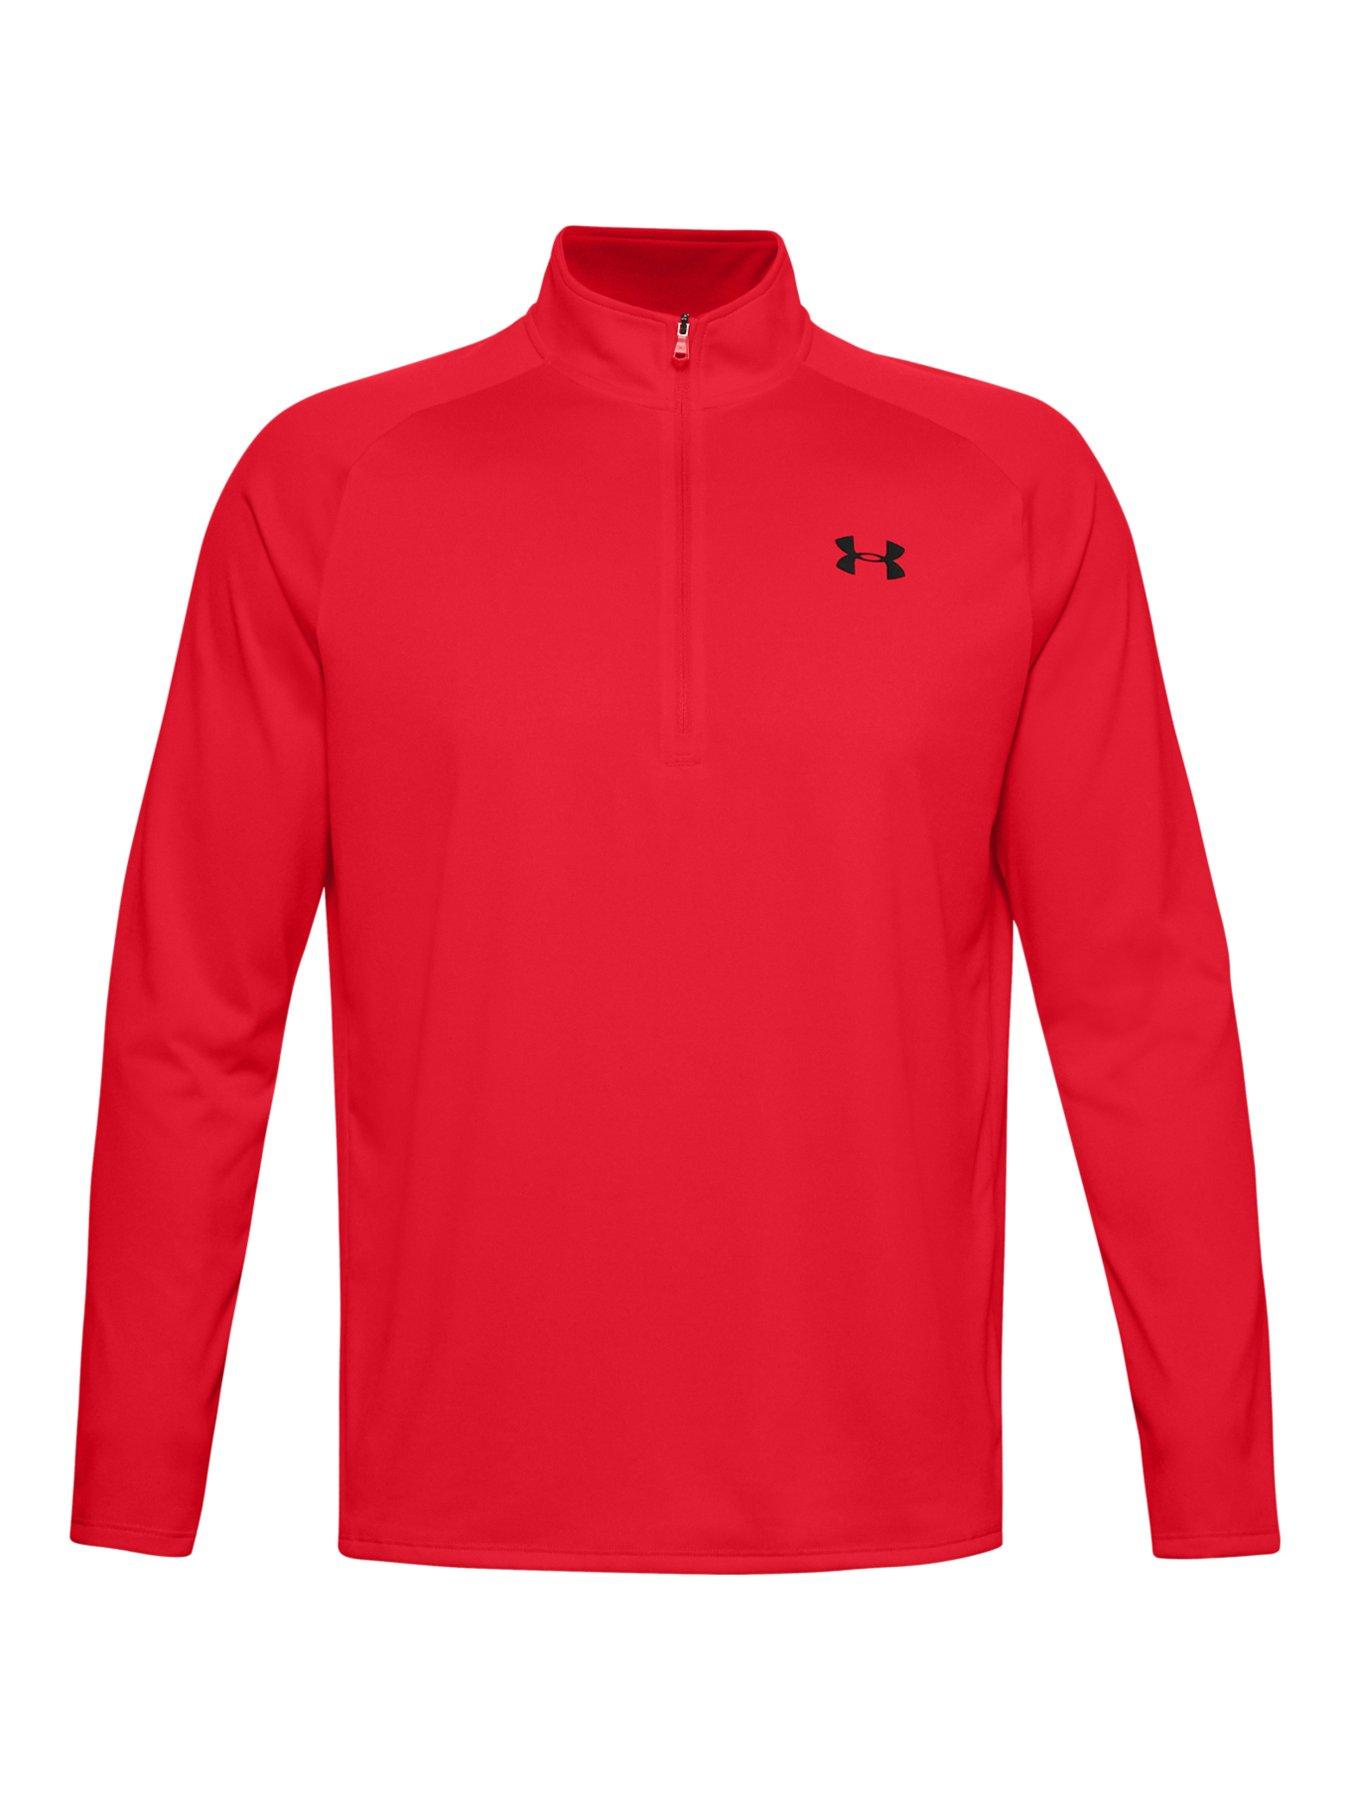 Tracksuits Training Tech 2.0 1/2 Zip Top - Red/Black